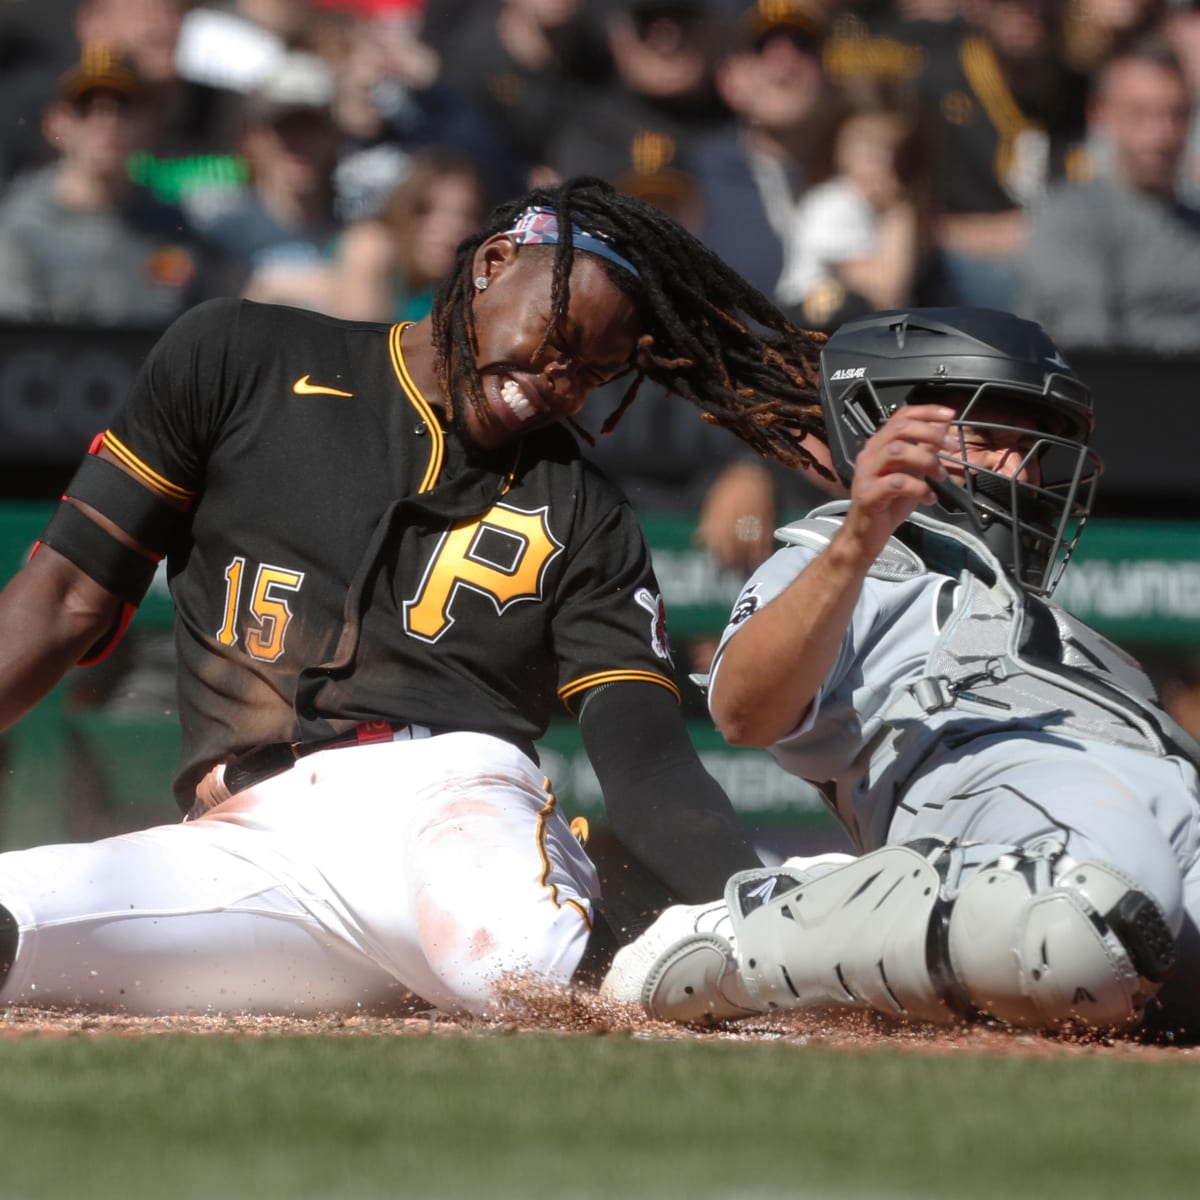 Oneil Cruz fractures his ankle in a collision at home, benches clear in  Pirates win